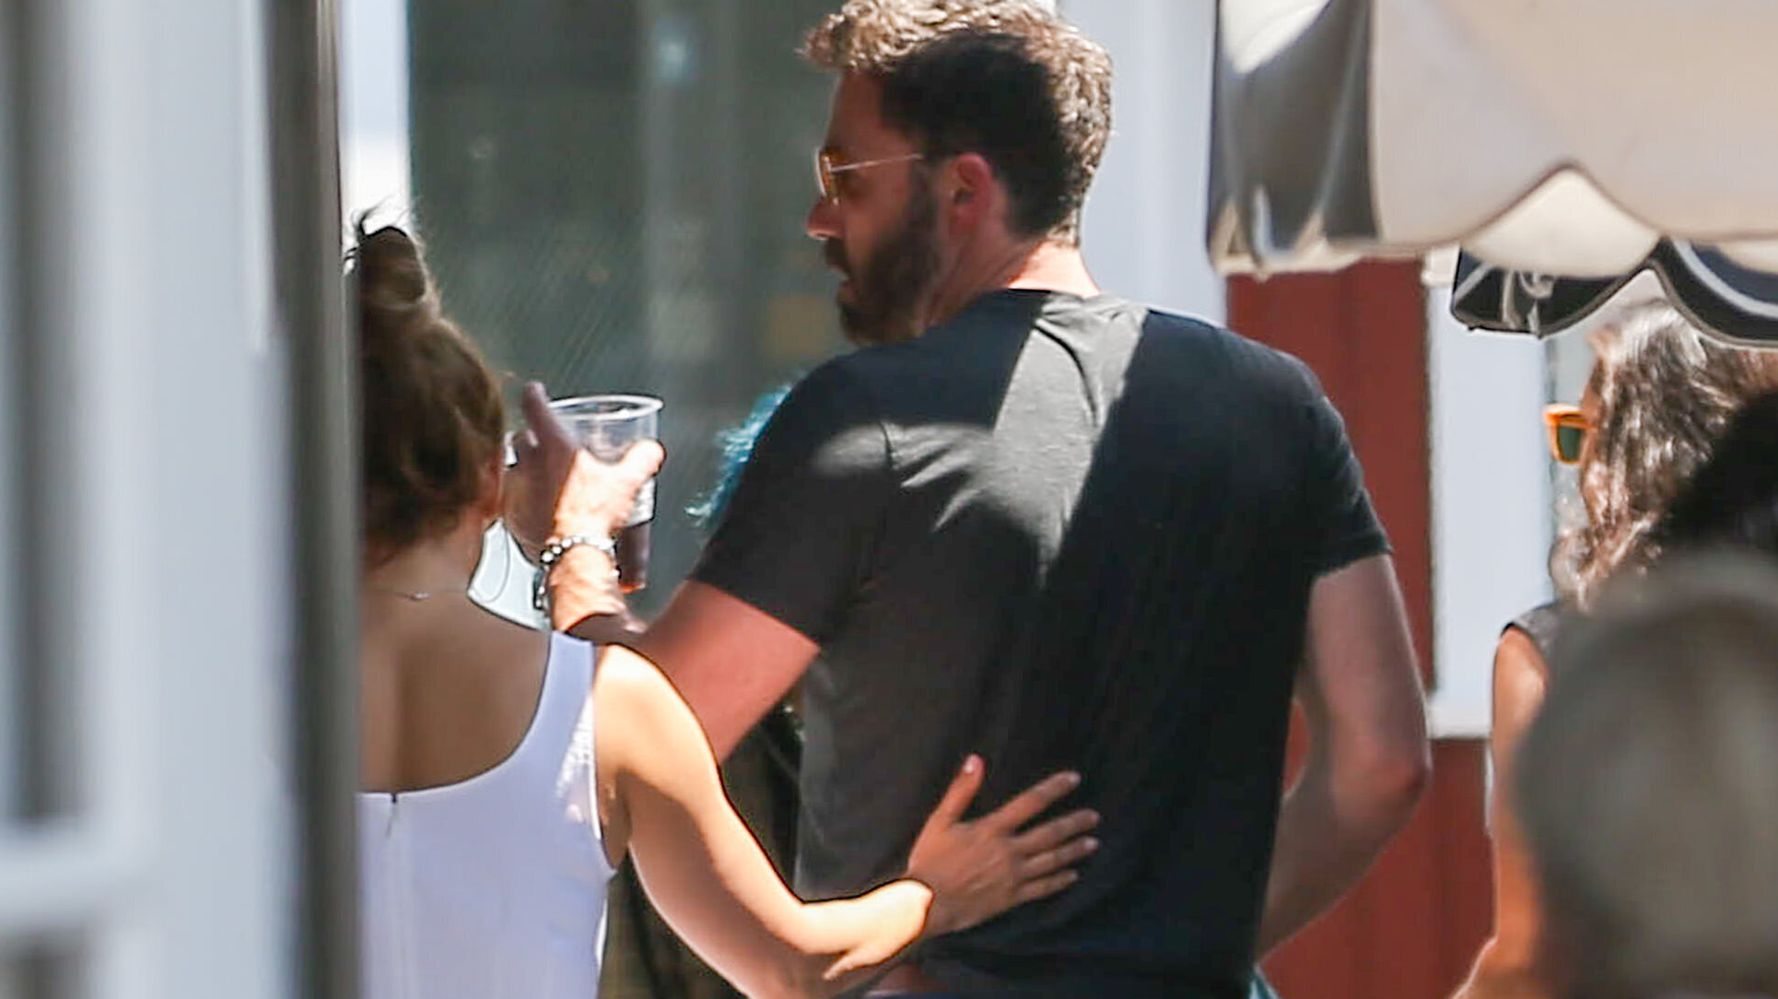 Jennifer Lopez Posts Makeout Pic With Ben Affleck, Finally Confirming Their Relationship